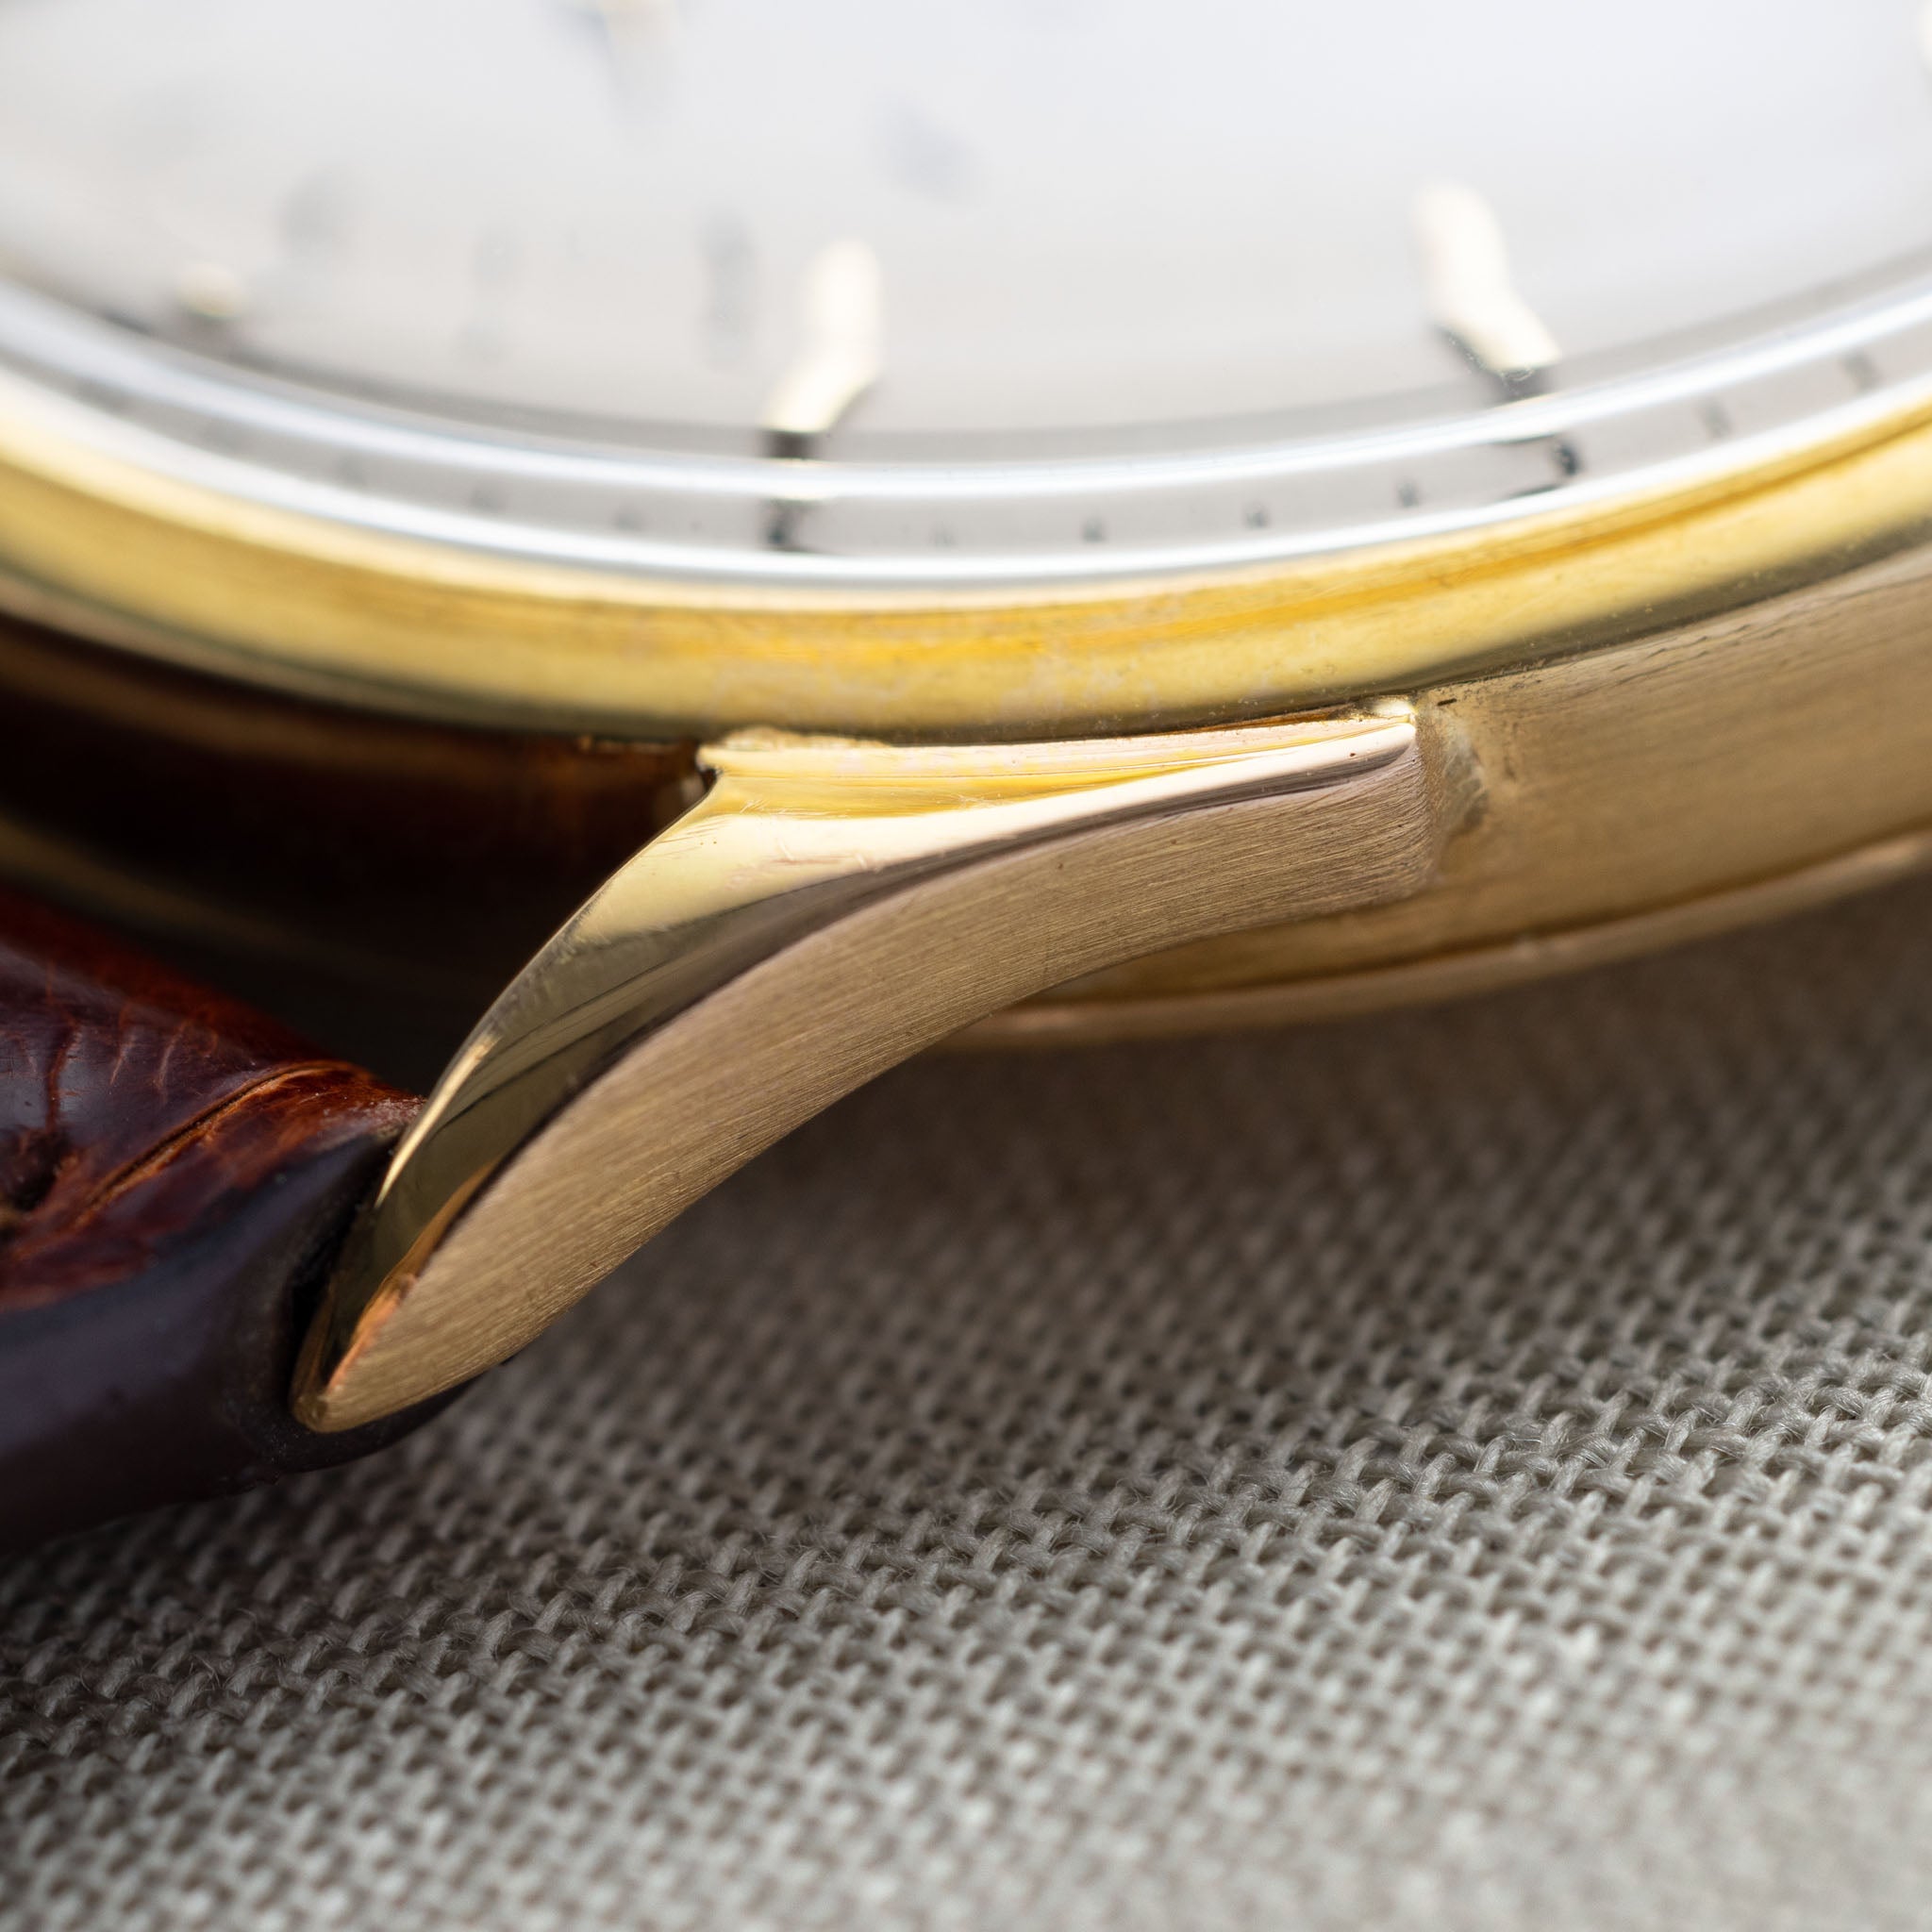 Patek Philippe Calatrava Ref 1589 With Extract From The Archives